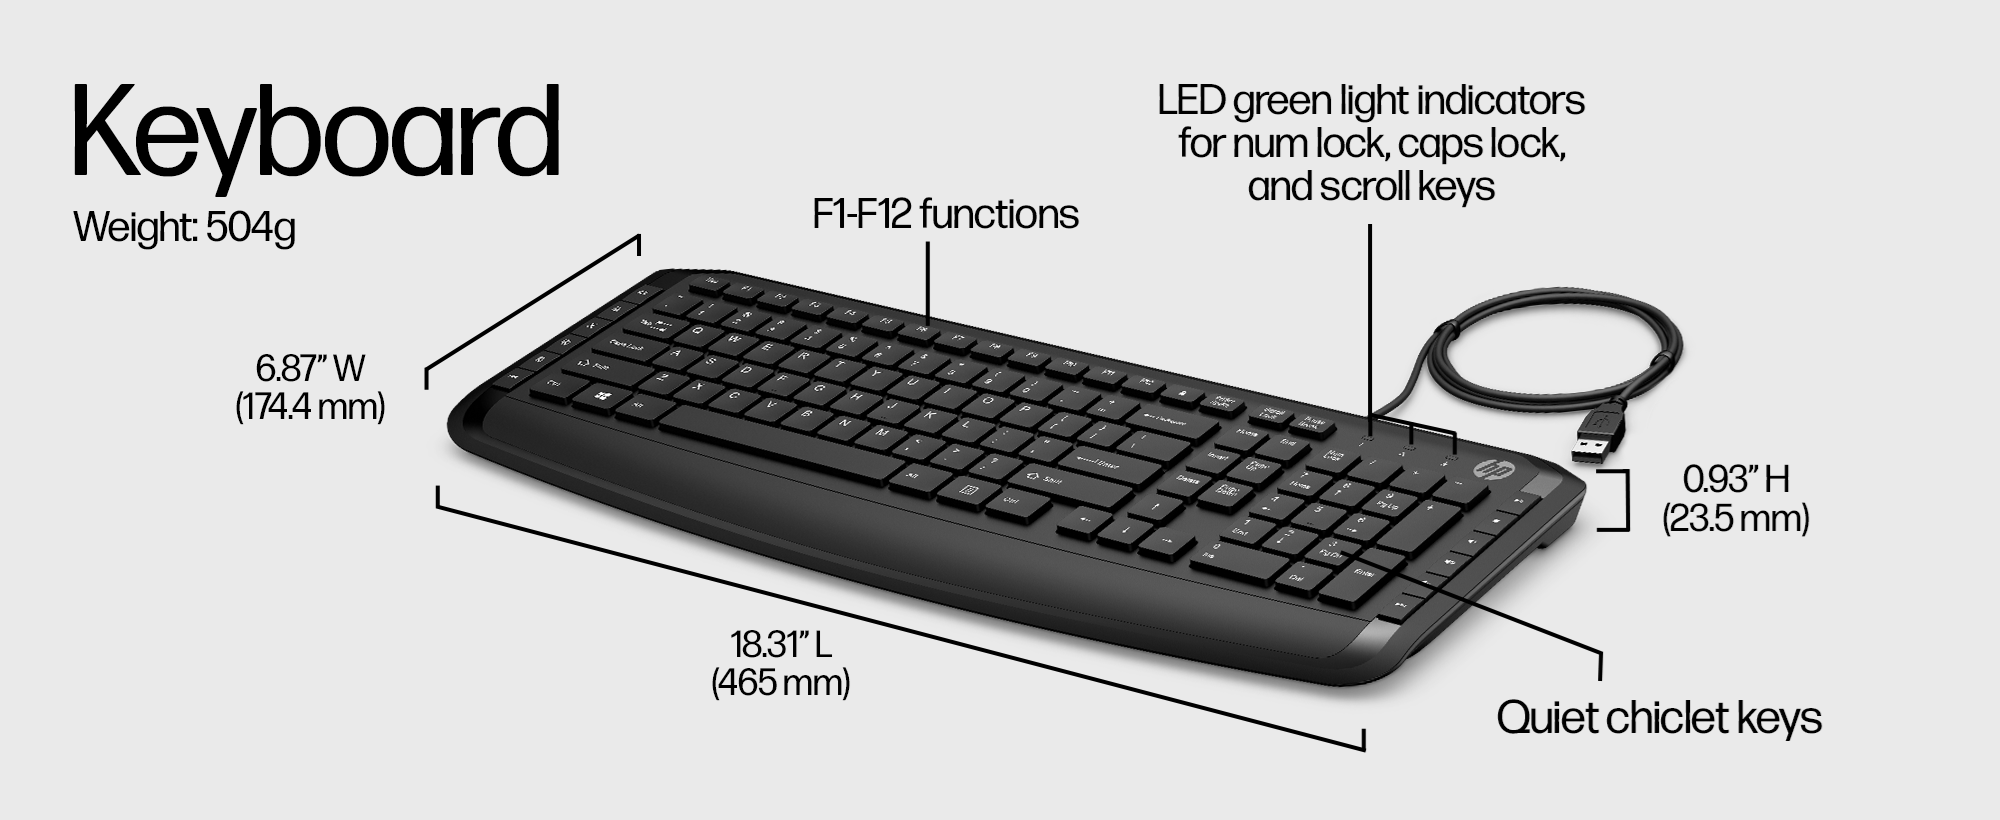 HP Pavilion 200 - keyboard and mouse set - black - 9DF28AA#ABL